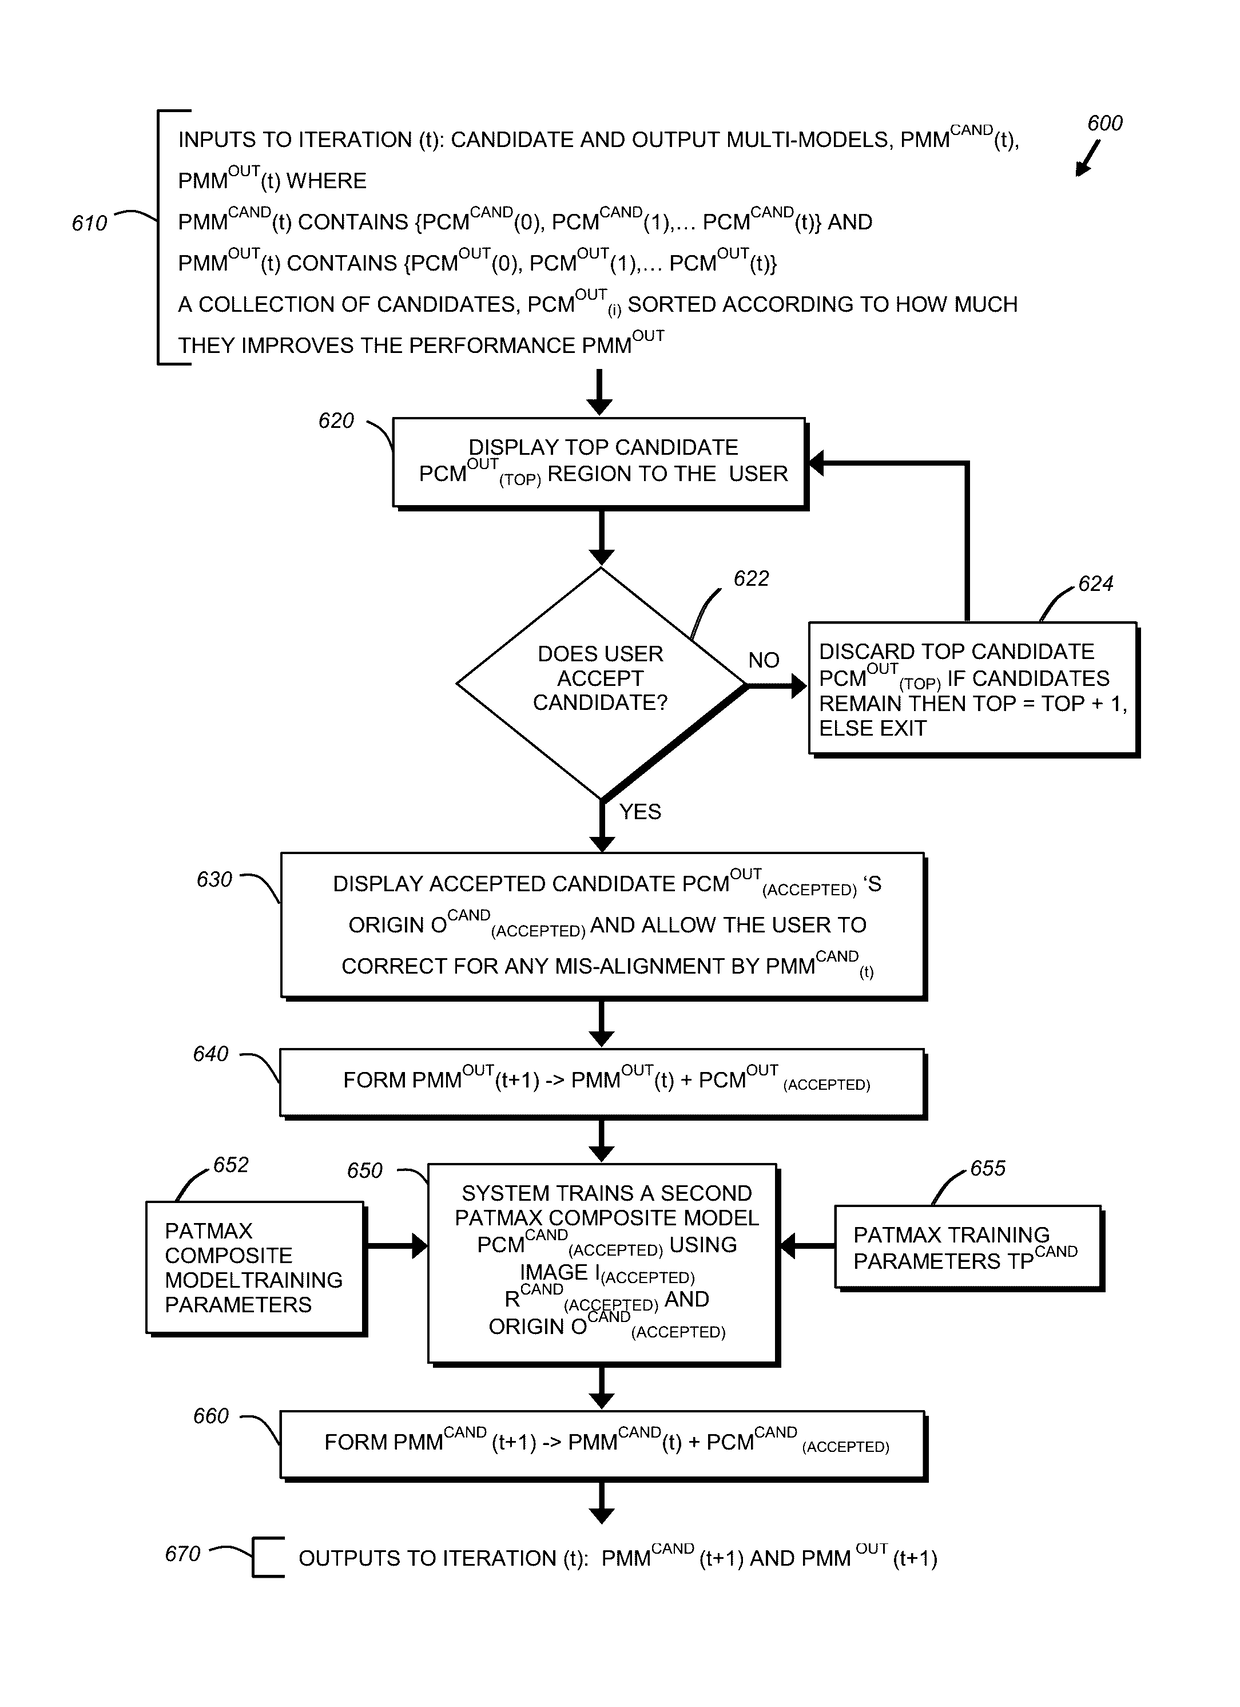 Semi-supervised method for training multiple pattern recognition and registration tool models